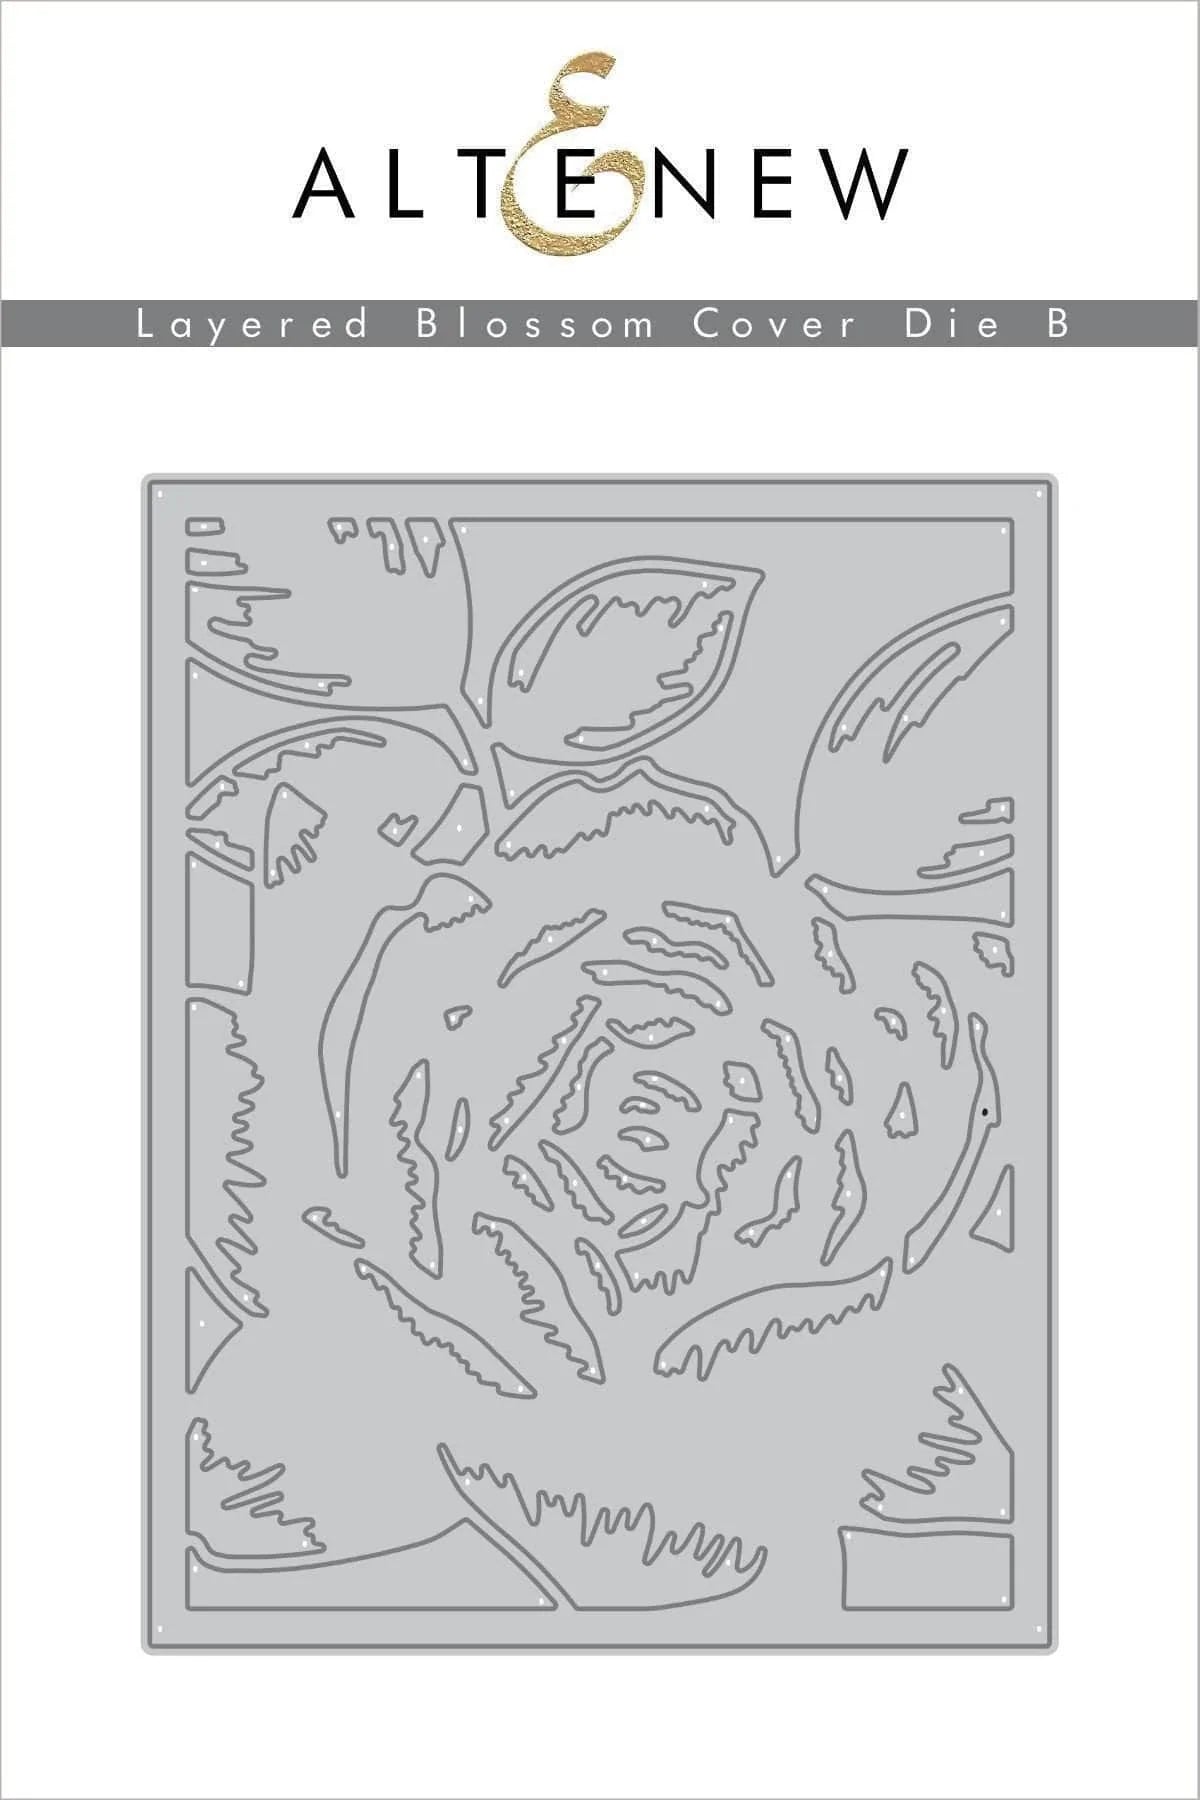 Dies Layered Blossom Cover Die B